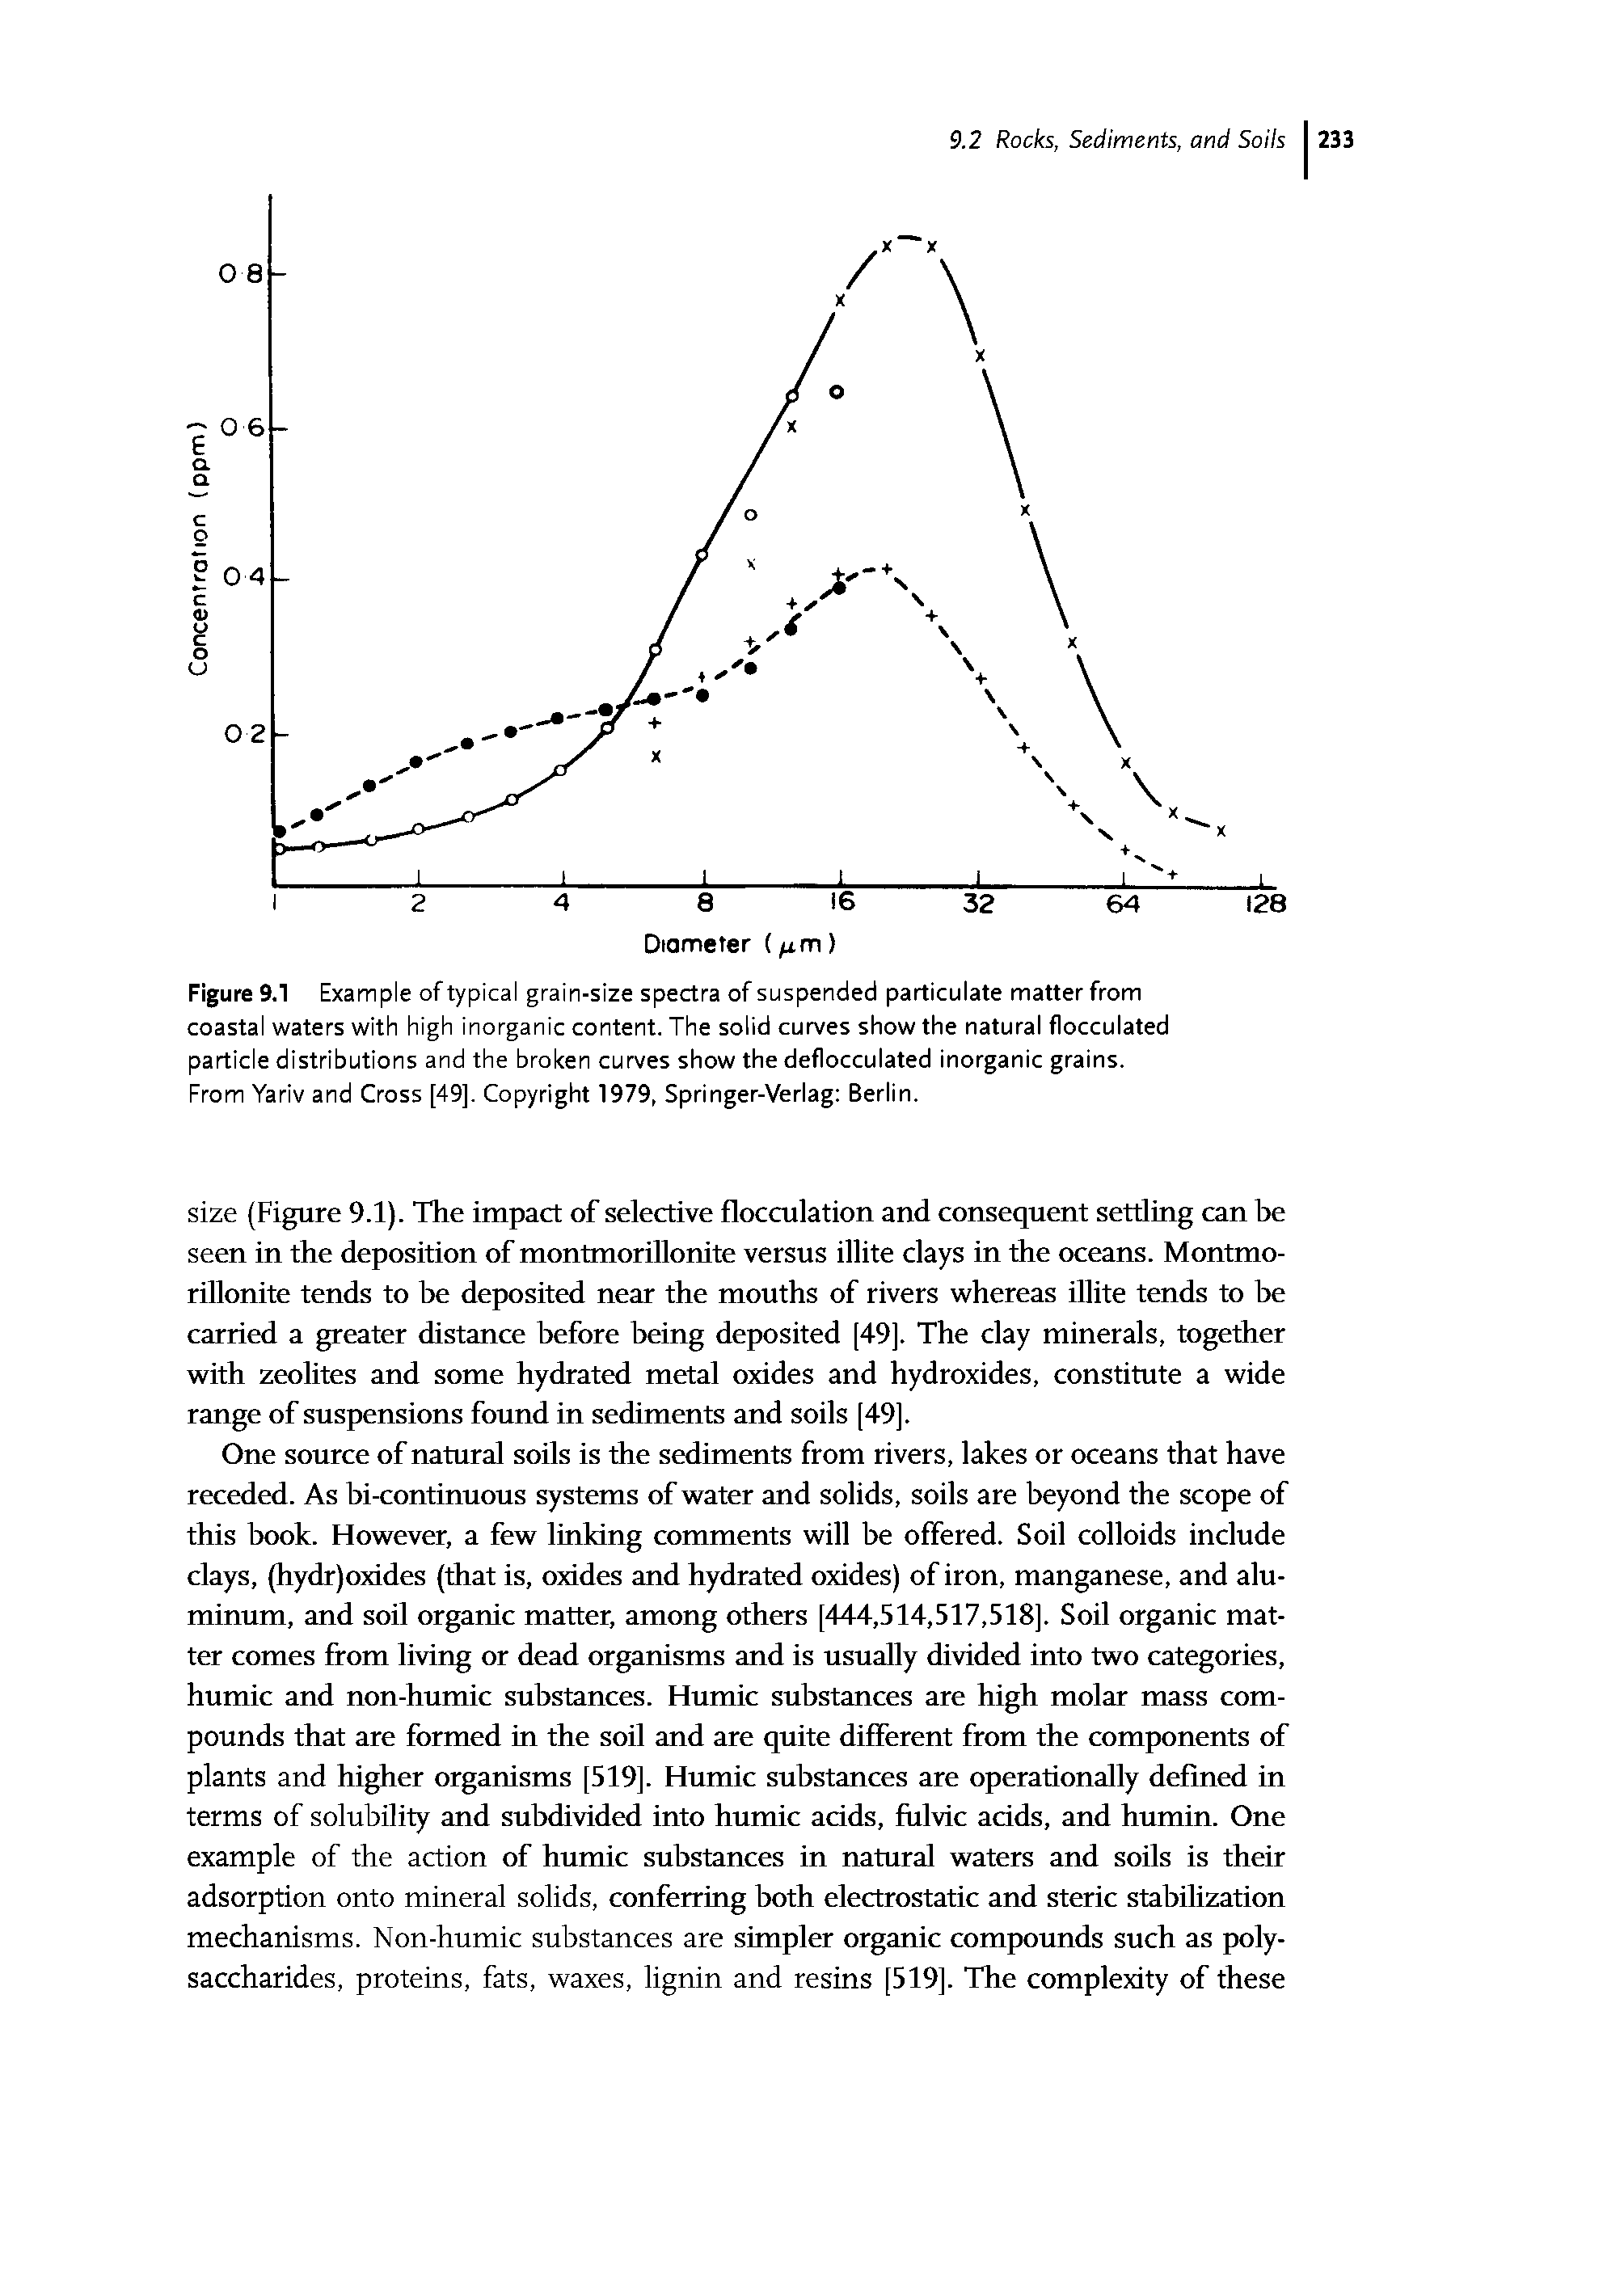 Figure 9.1 Example of typical grain-size spectra of suspended particulate matter from coastal waters with high inorganic content. The solid curves show the natural flocculated particle distributions and the broken curves show the deflocculated inorganic grains. From Yariv and Cross [49], Copyright 1979, Springer-Verlag Berlin.